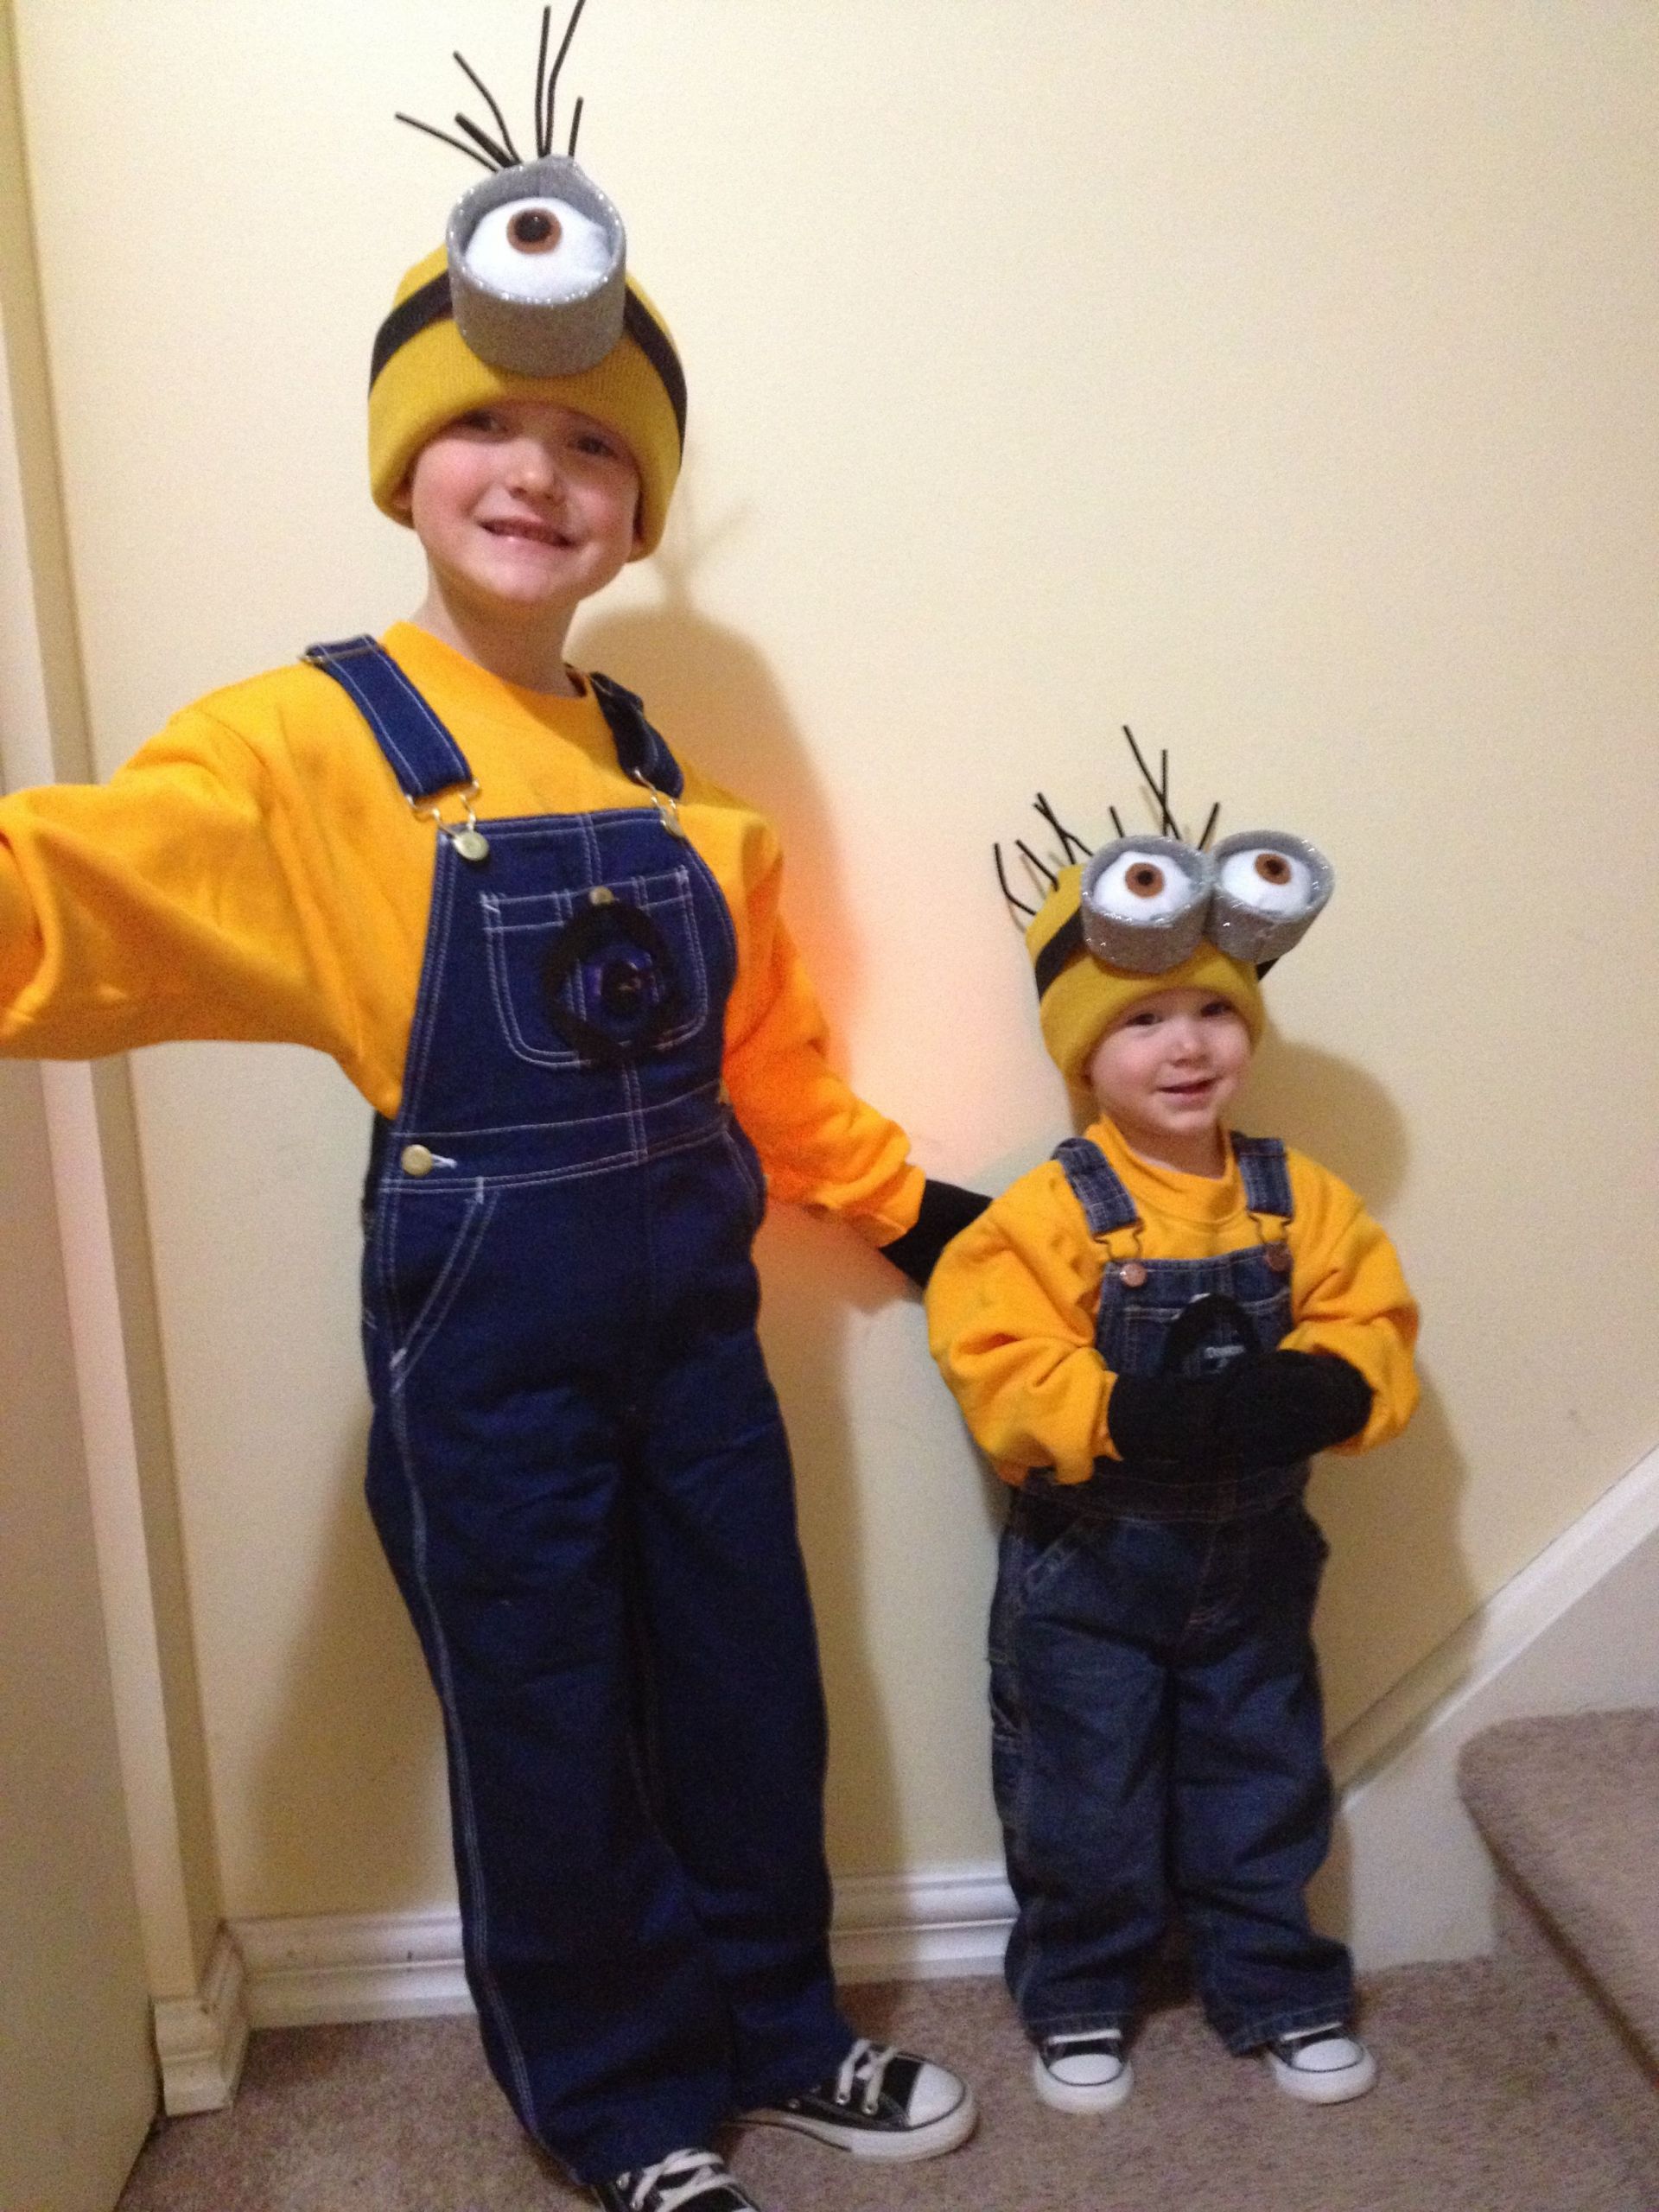 DIY Minion Costume Toddler
 Minion costume Despicable Me Maybe Gavin will want to be